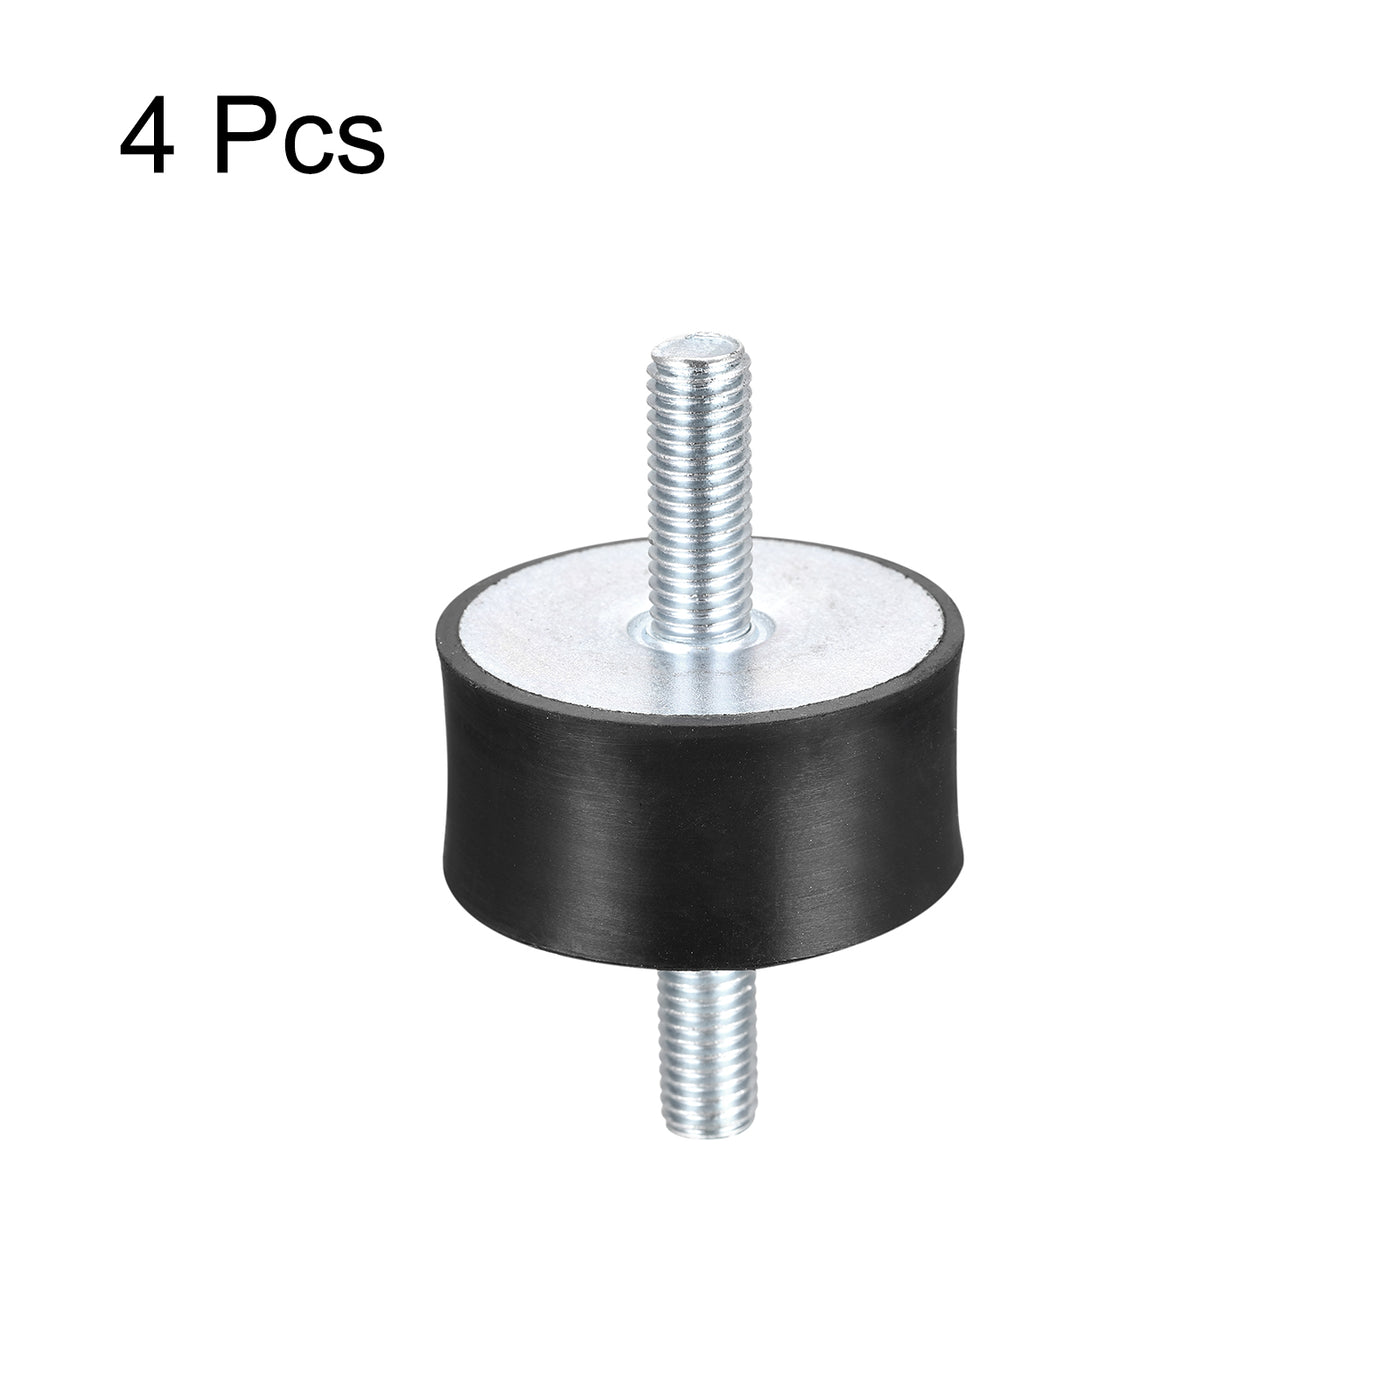 uxcell Uxcell Rubber Mounts 4pcs M10x28mm Male Vibration Isolator Shock Absorber D50mmxH25mm